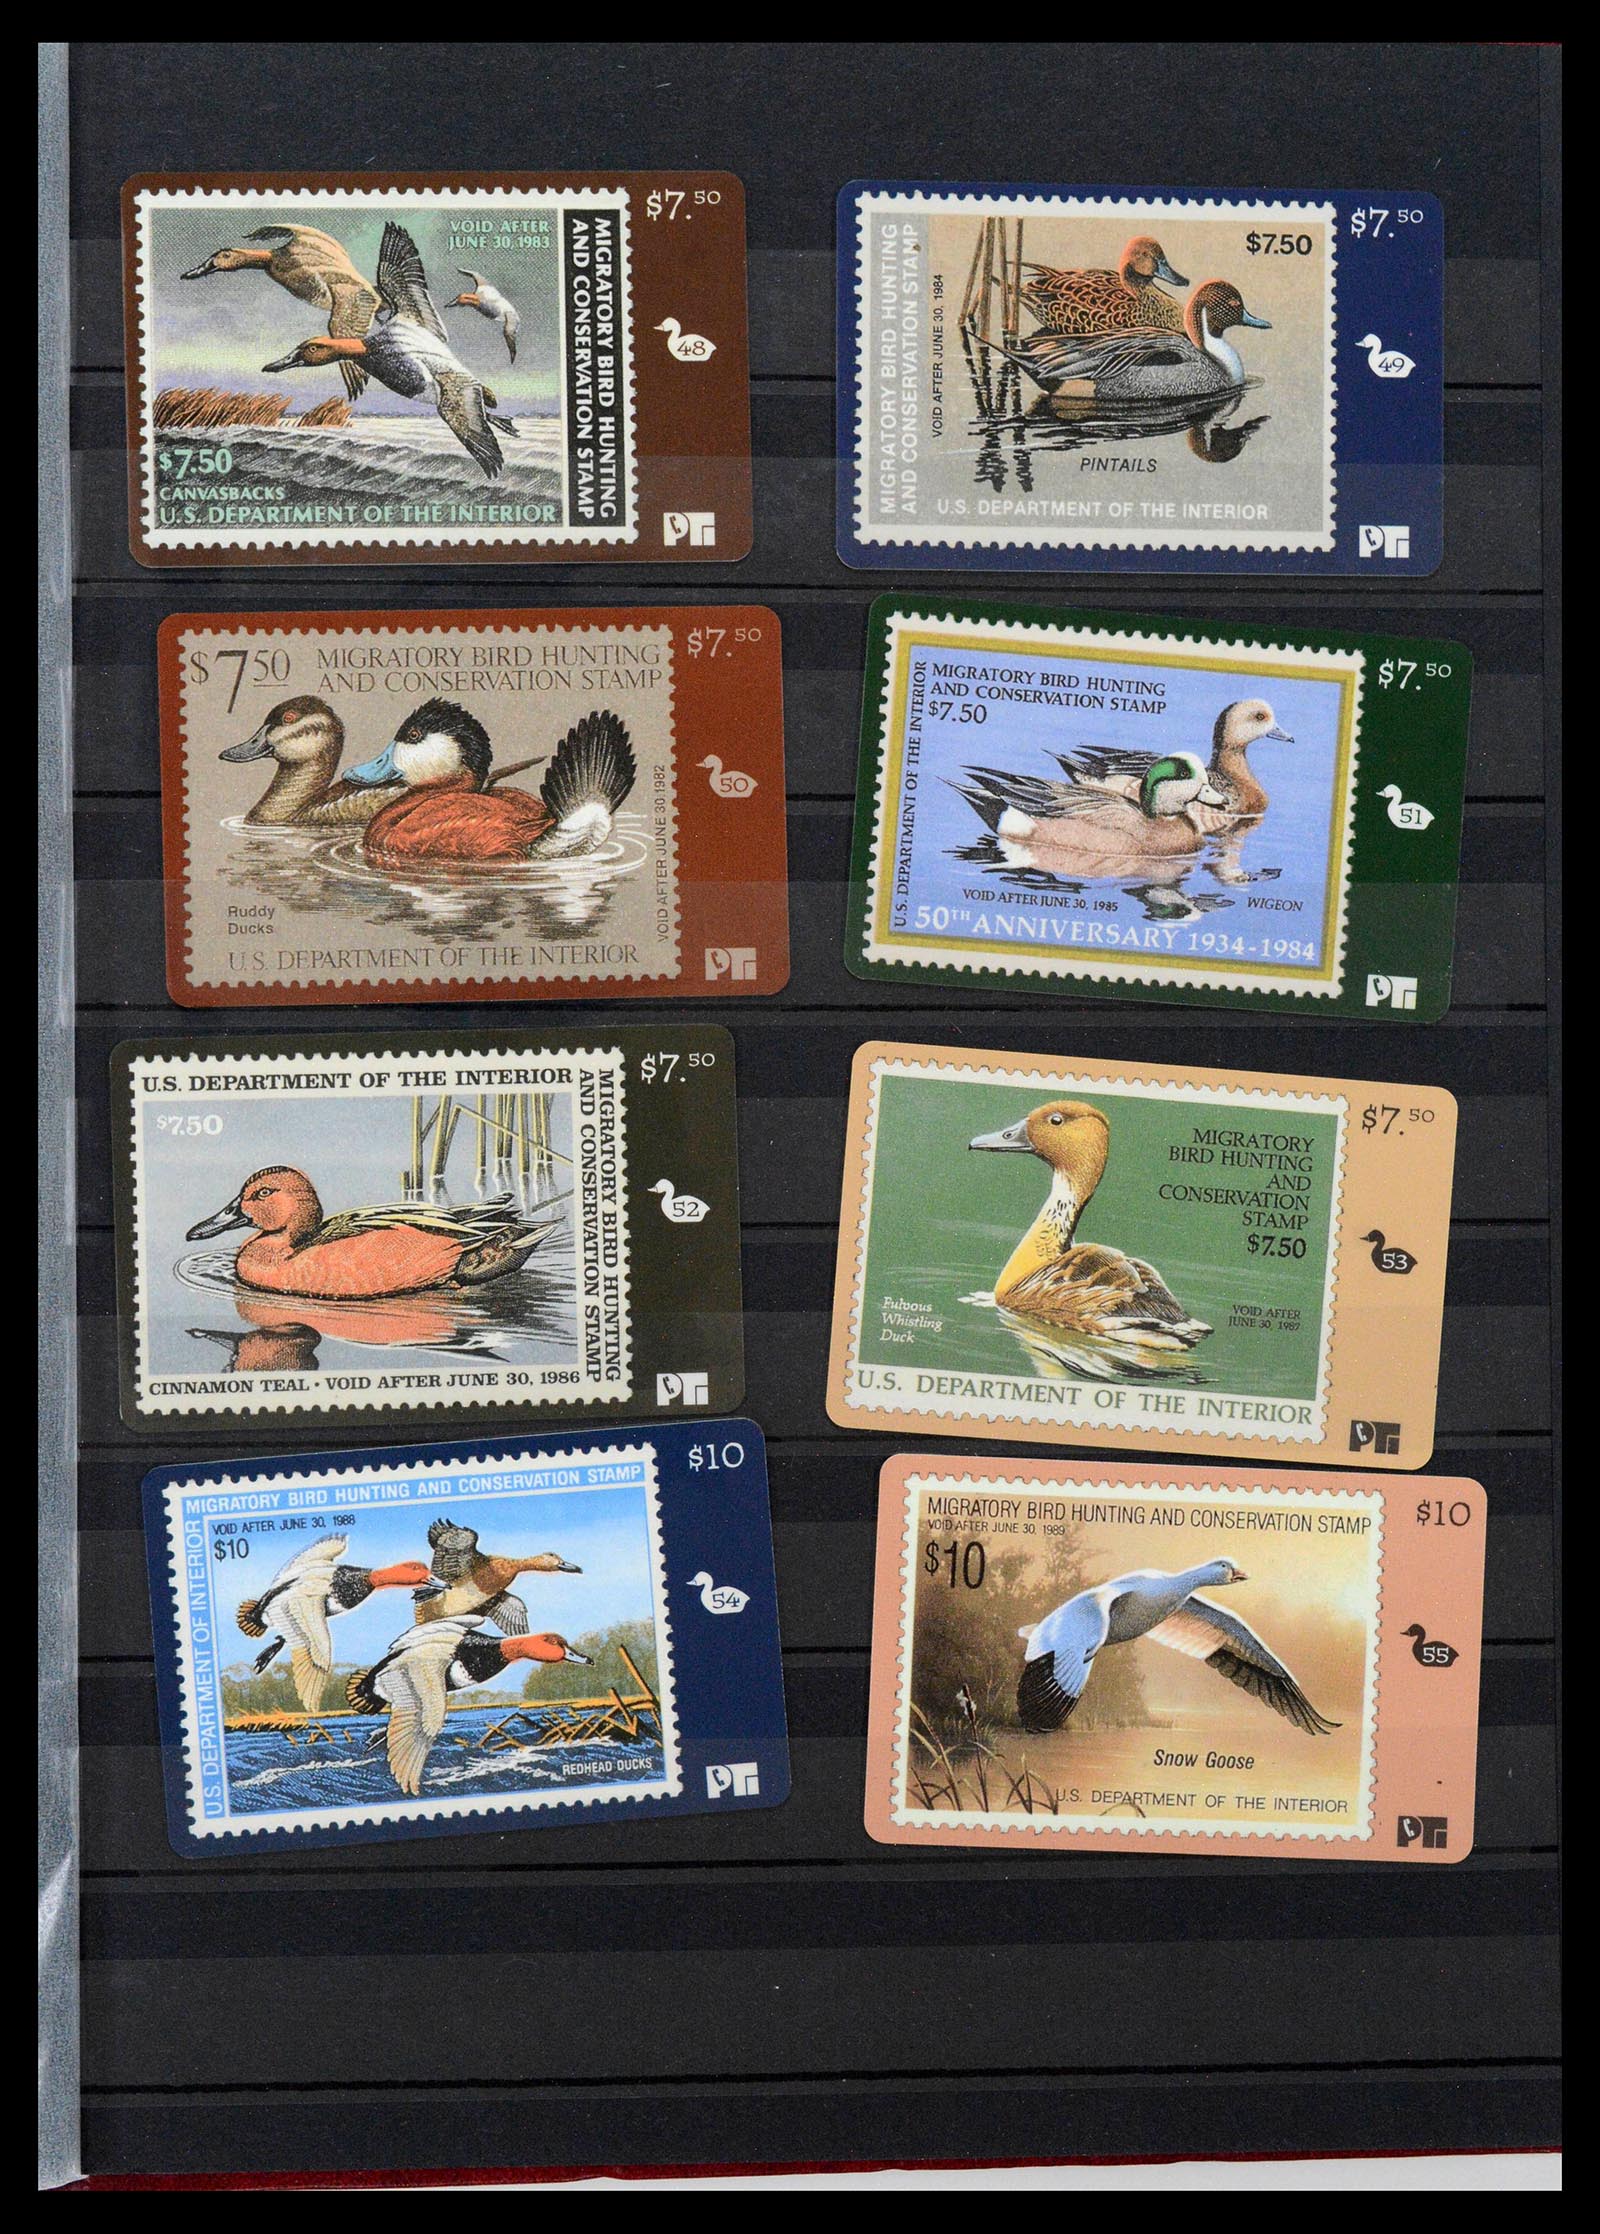 39426 0025 - Stamp collection 39426 USA duckstamps 1934-2007.